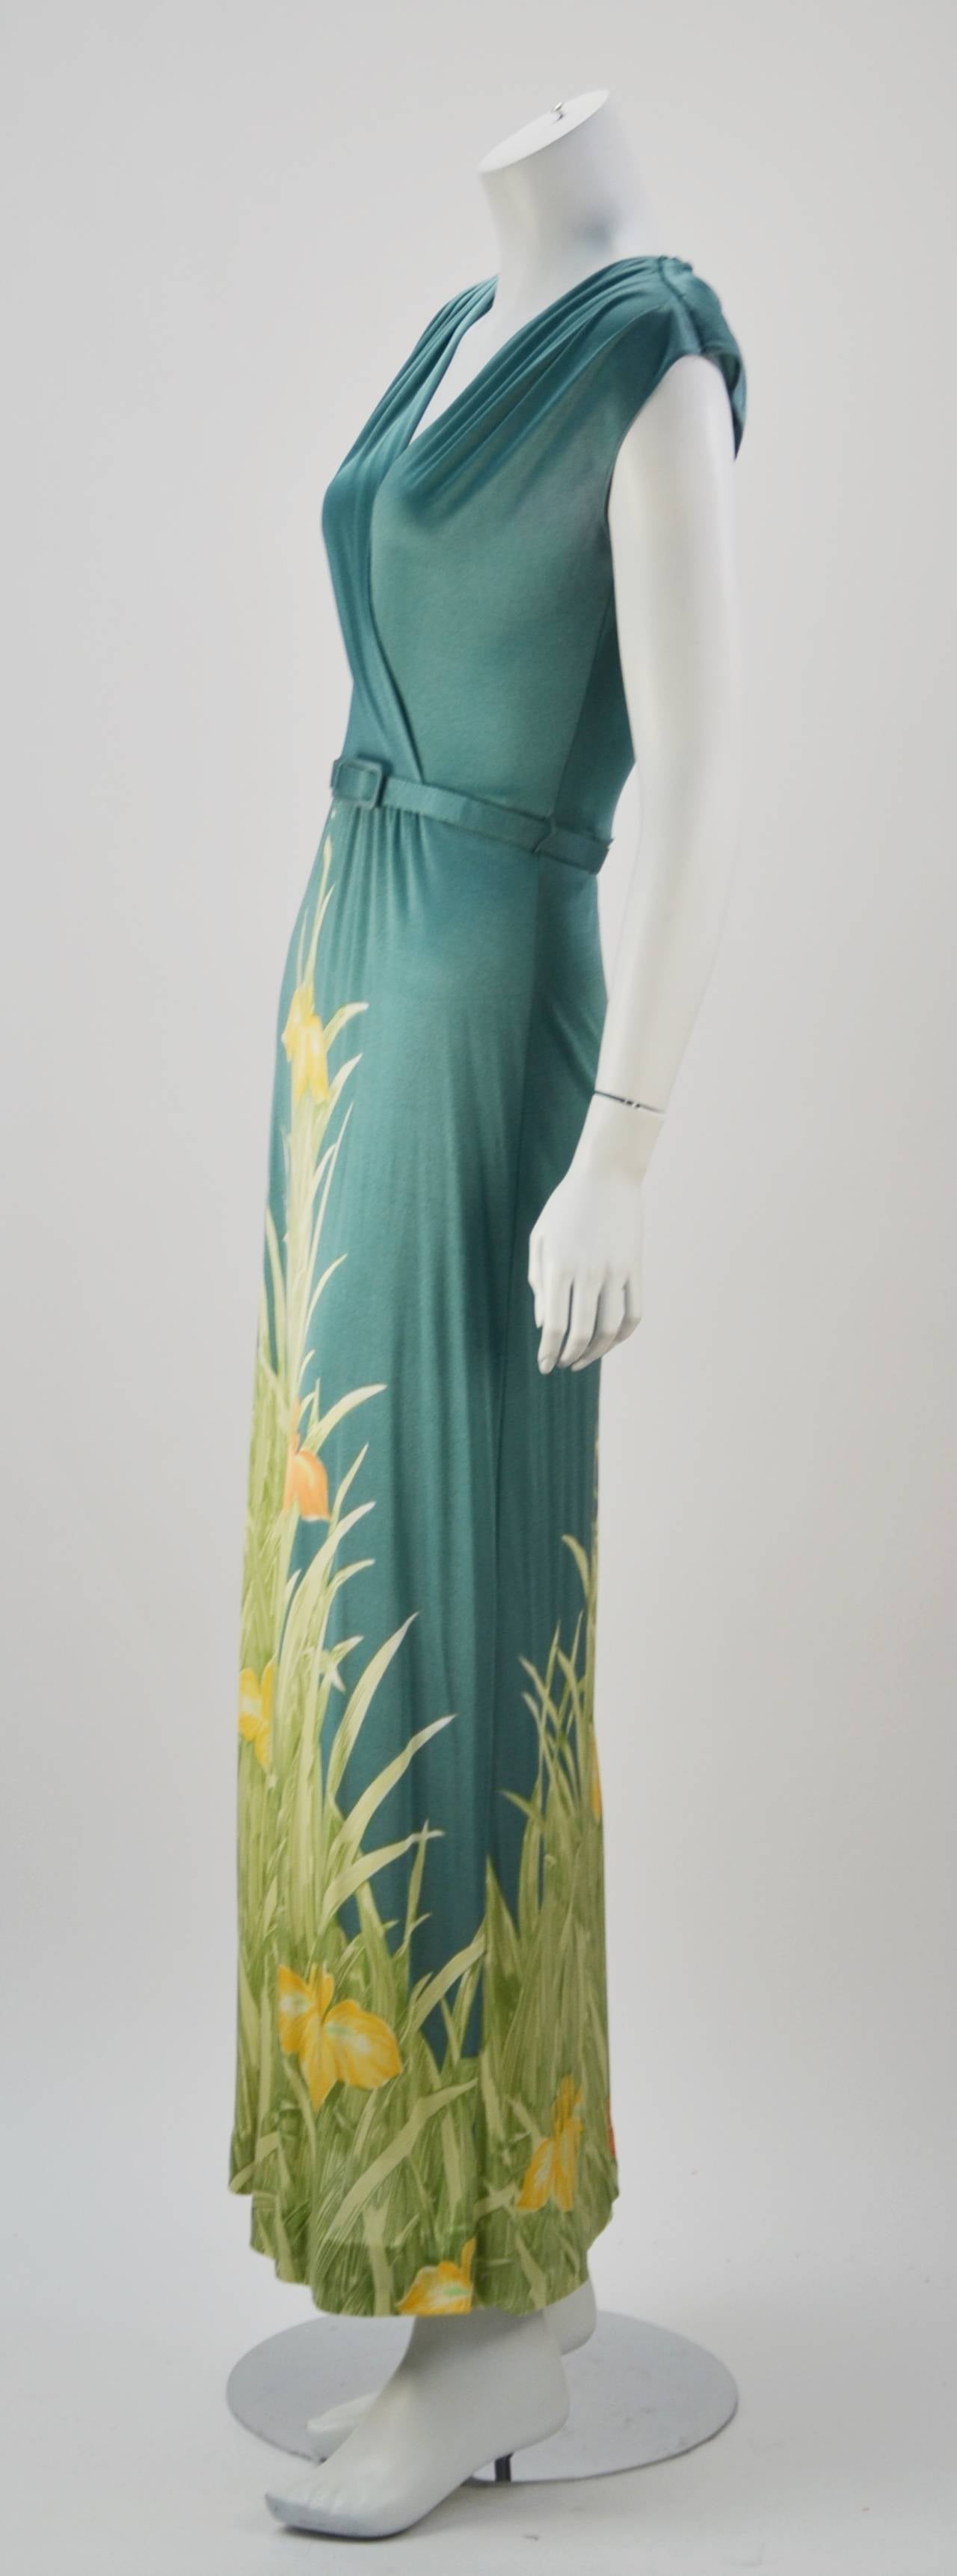 Spring is here in this Leonard Sunshine dress. Flattering, fits like a glove with stretch, and comfortable too!  Louisiana iris print is placed strategically on the skirt and also accents the belt. The flowers are orange and yellow against green